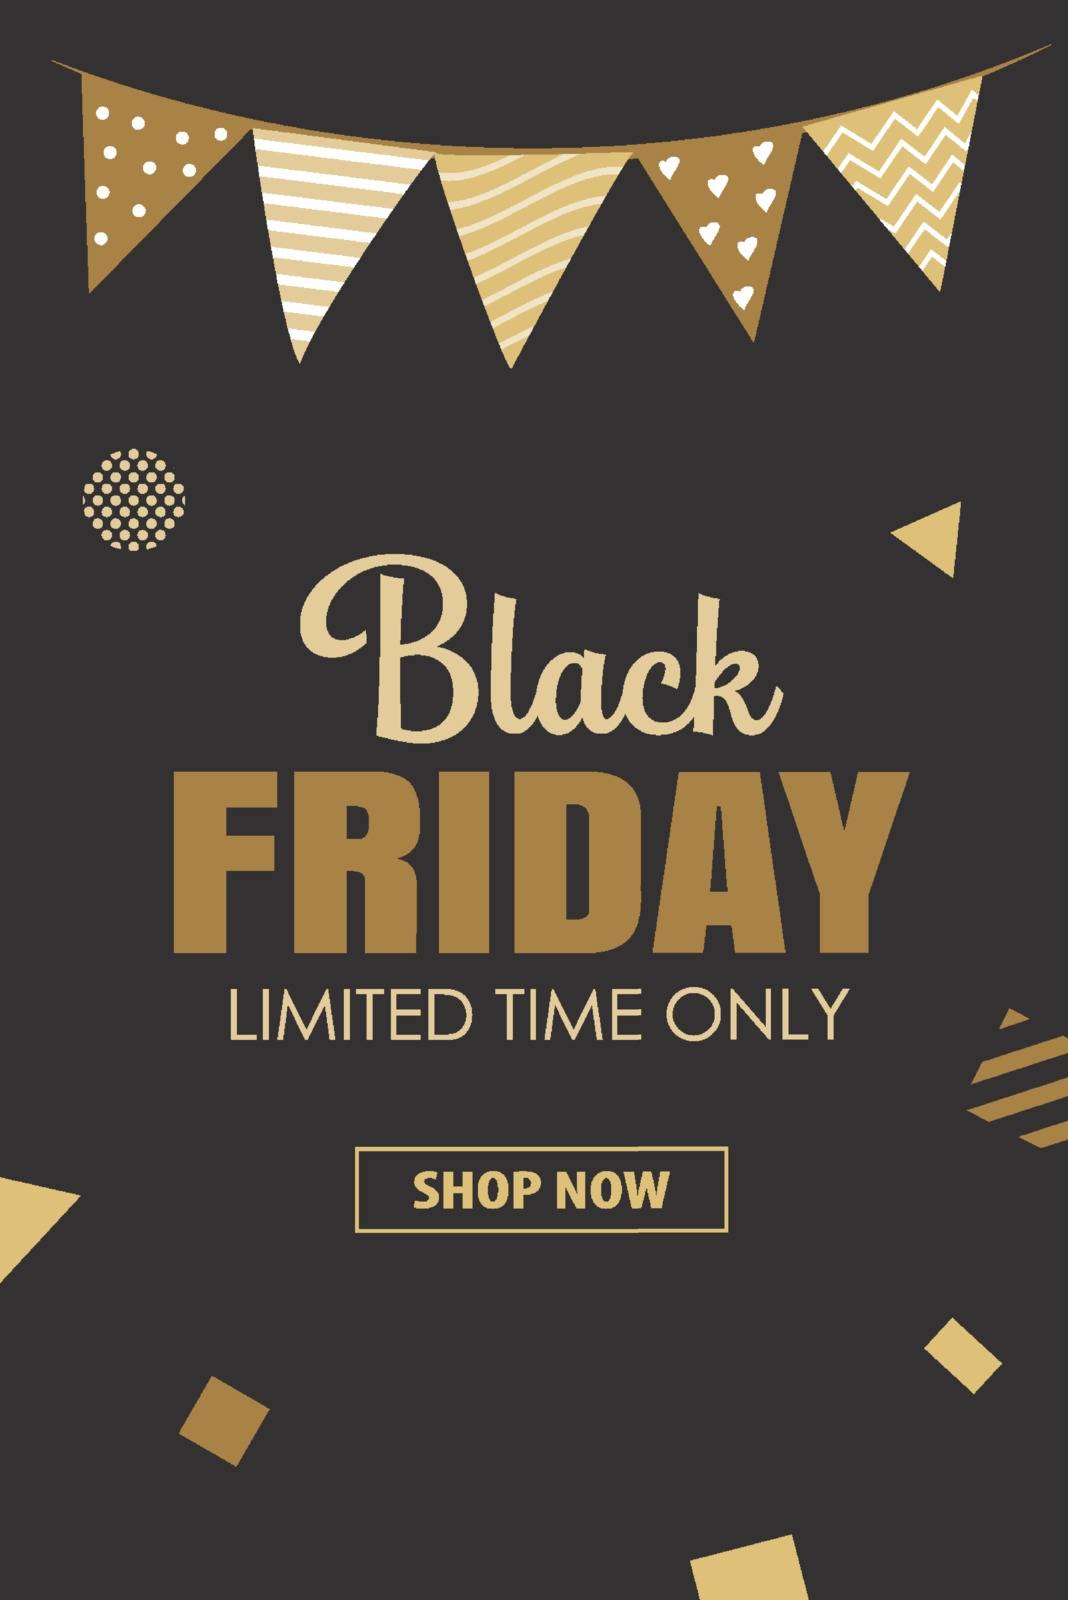 Black friday sale banner background template. Use for cover, car by kaisorn